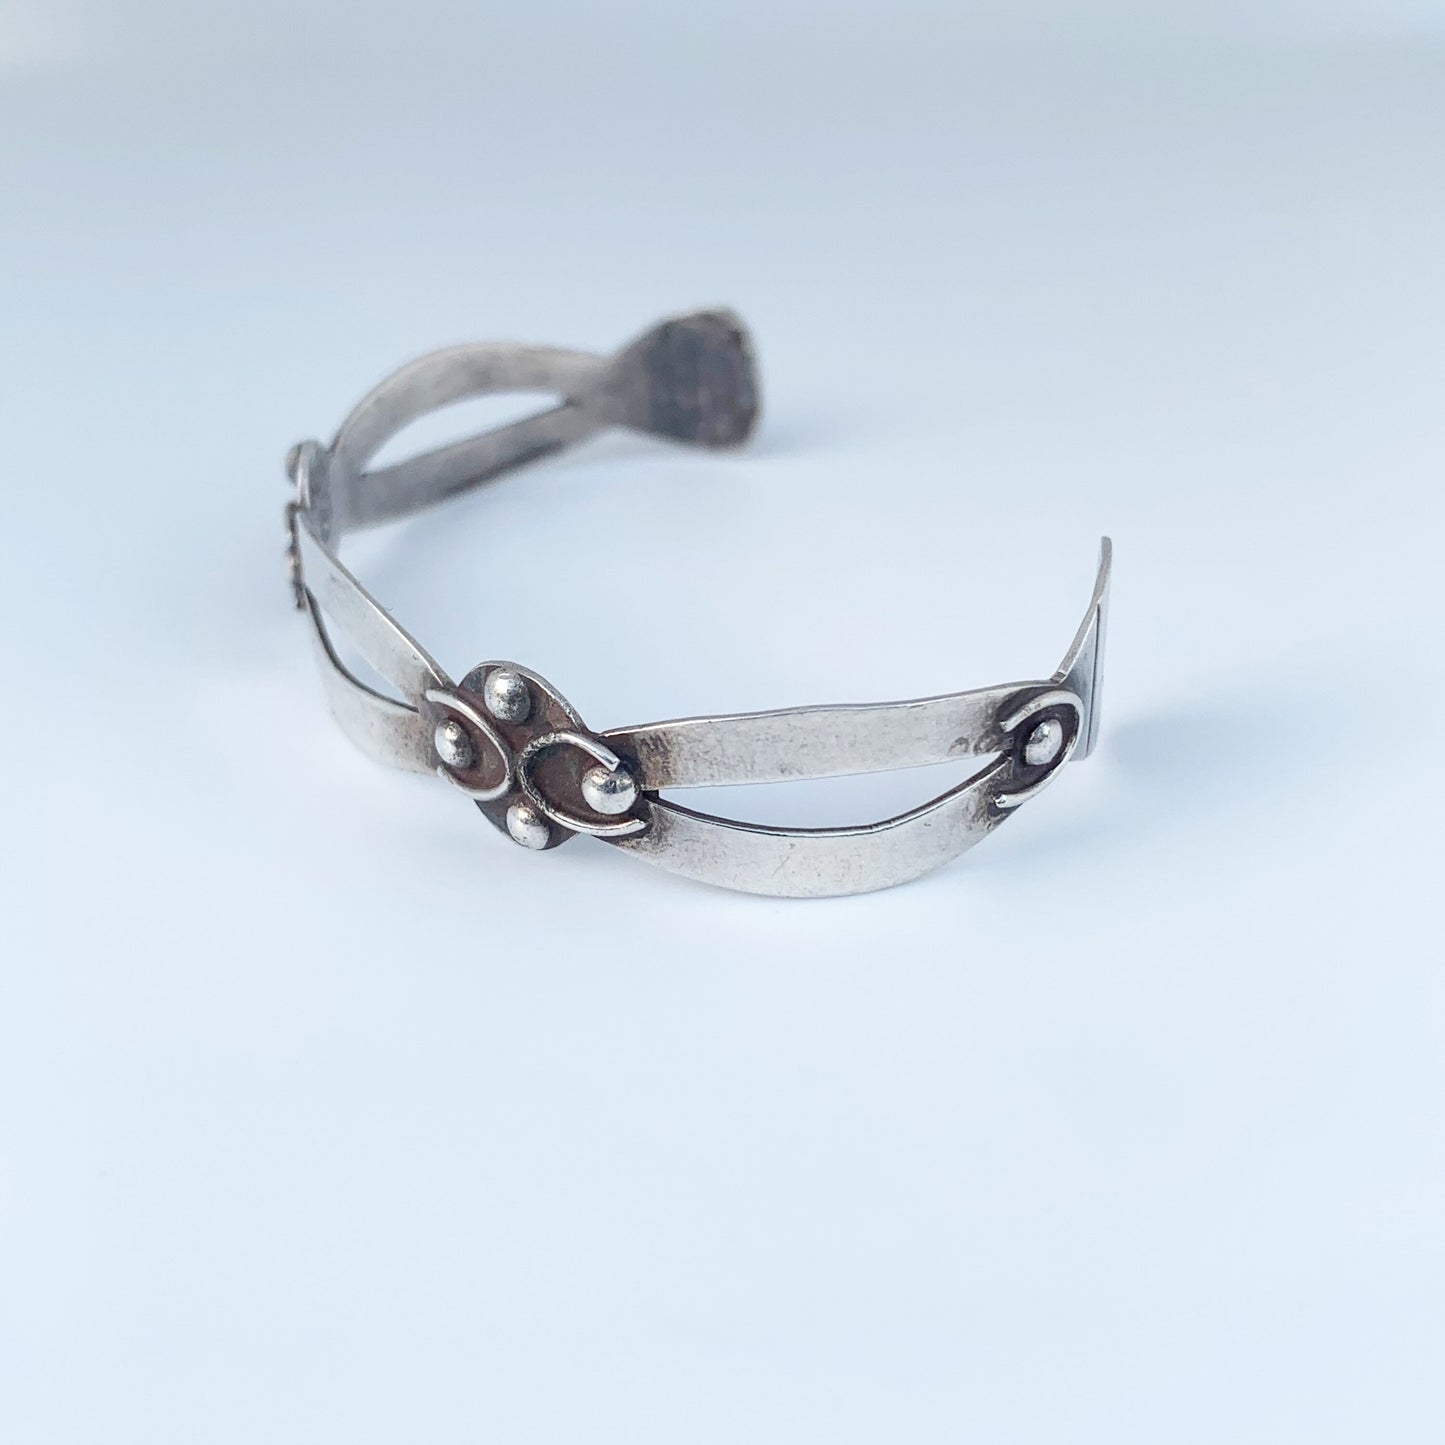 Vintage Mexican Modernist Cuff Bracelet | Sterling Juvenal Taxco Cuff